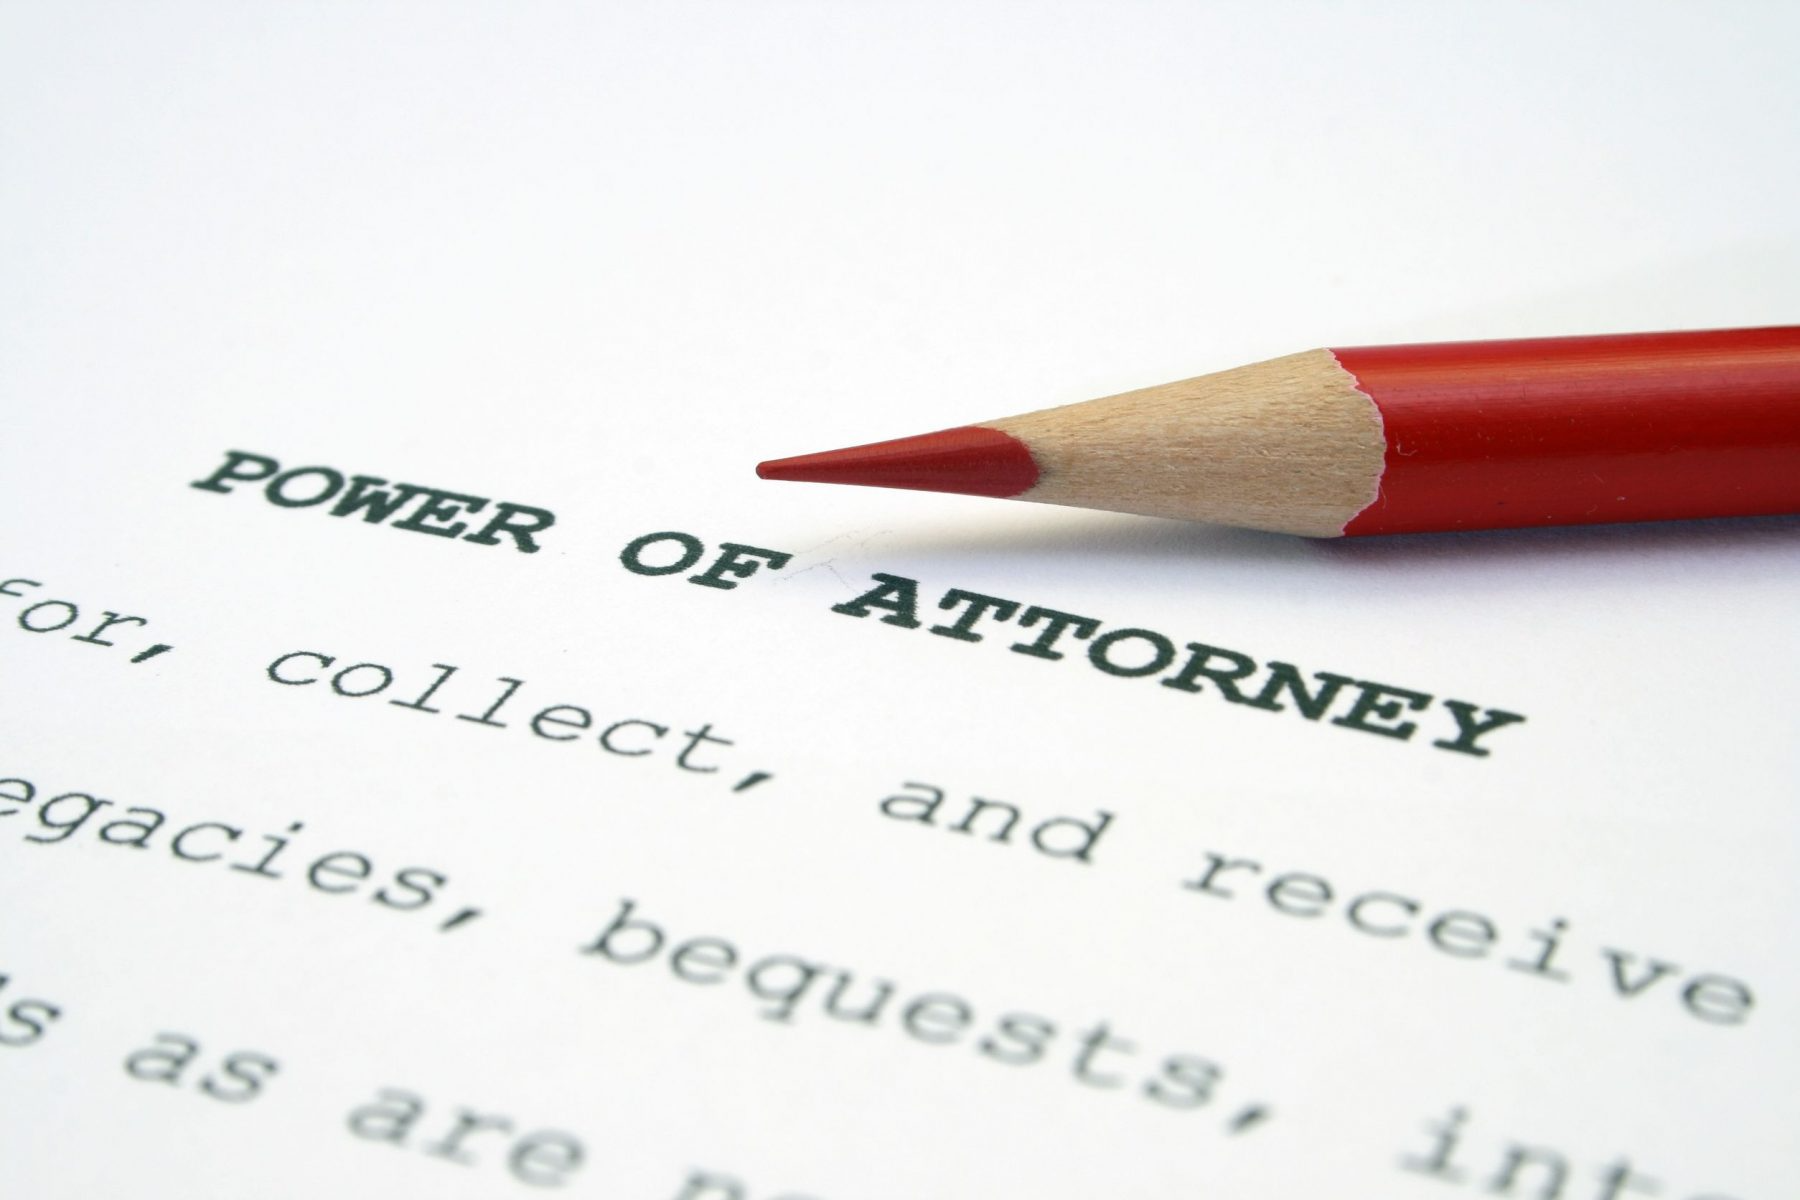 Power of attorney paper with a red pencil laying on top